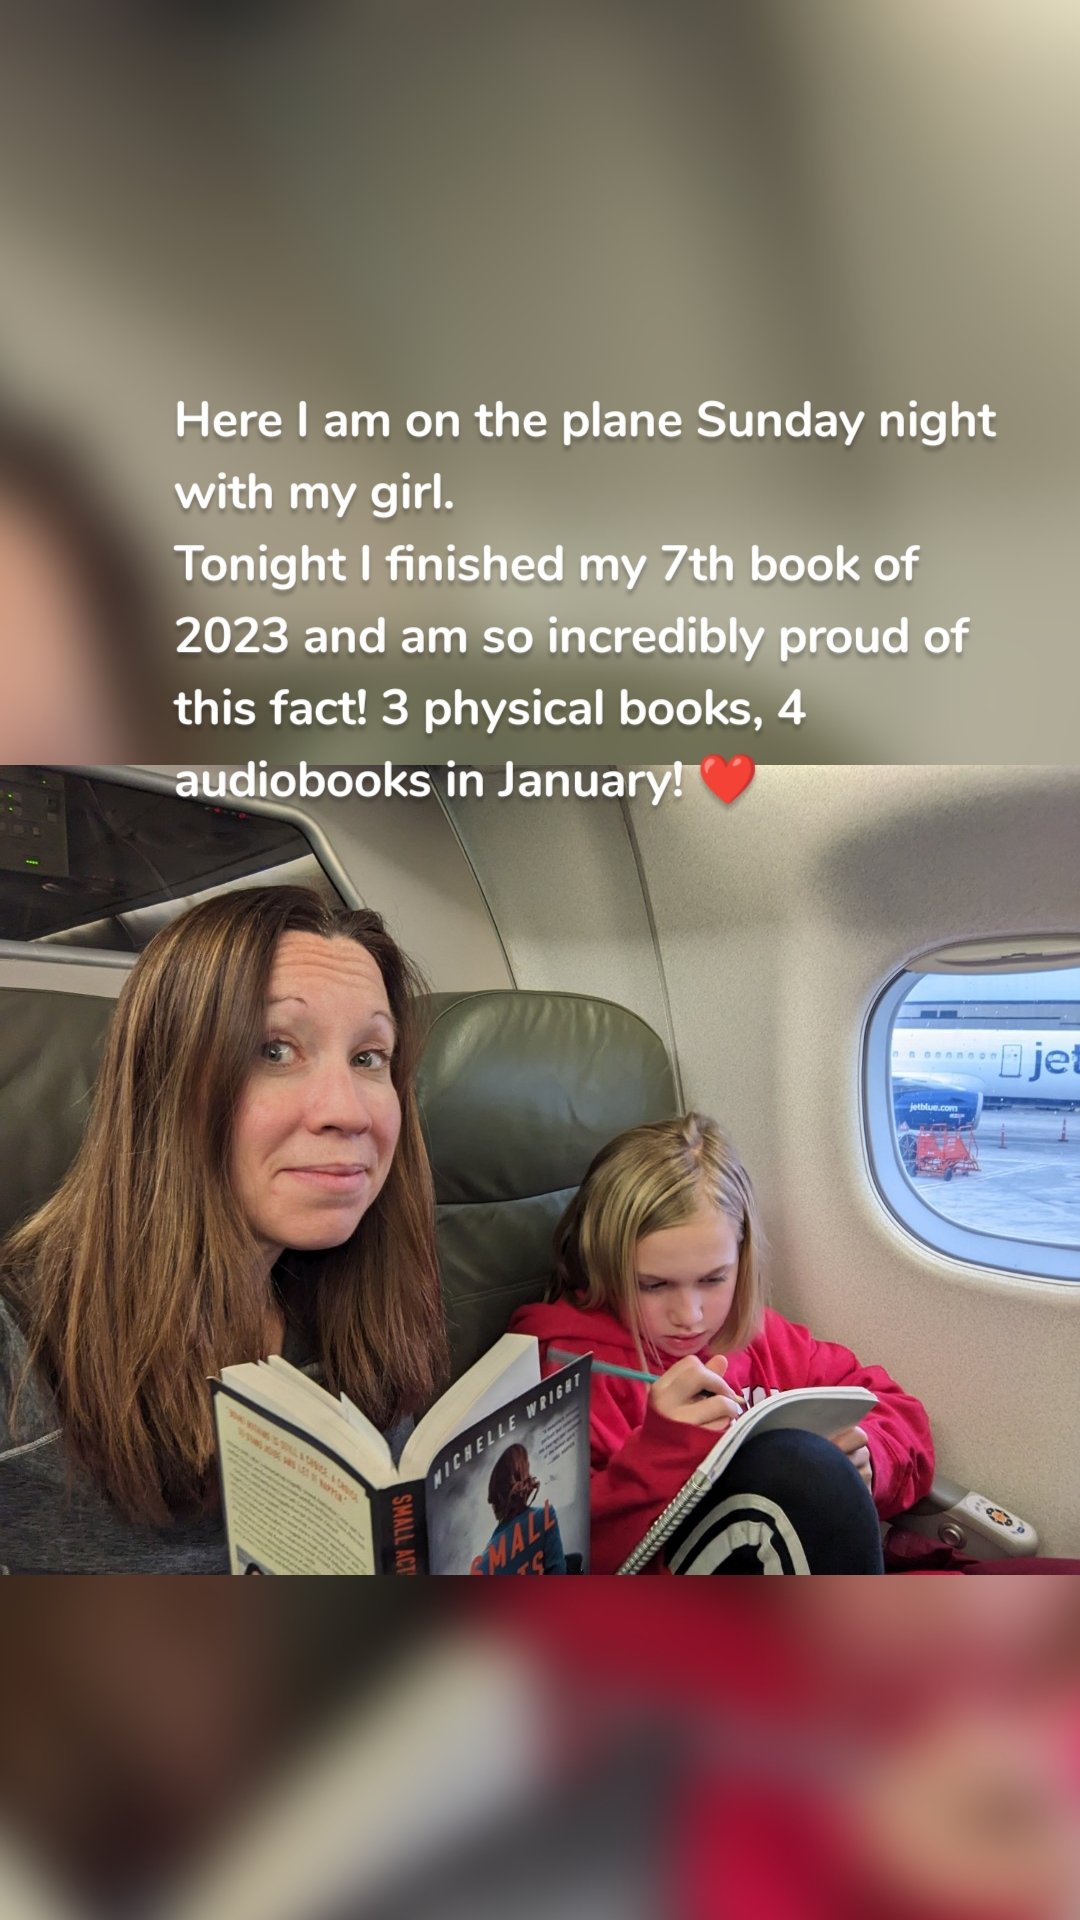 Here I am on the plane Sunday night with my girl.
Tonight I finished my 7th book of 2023 and am so incredibly proud of this fact! 3 physical books, 4 audiobooks in January! ❤️